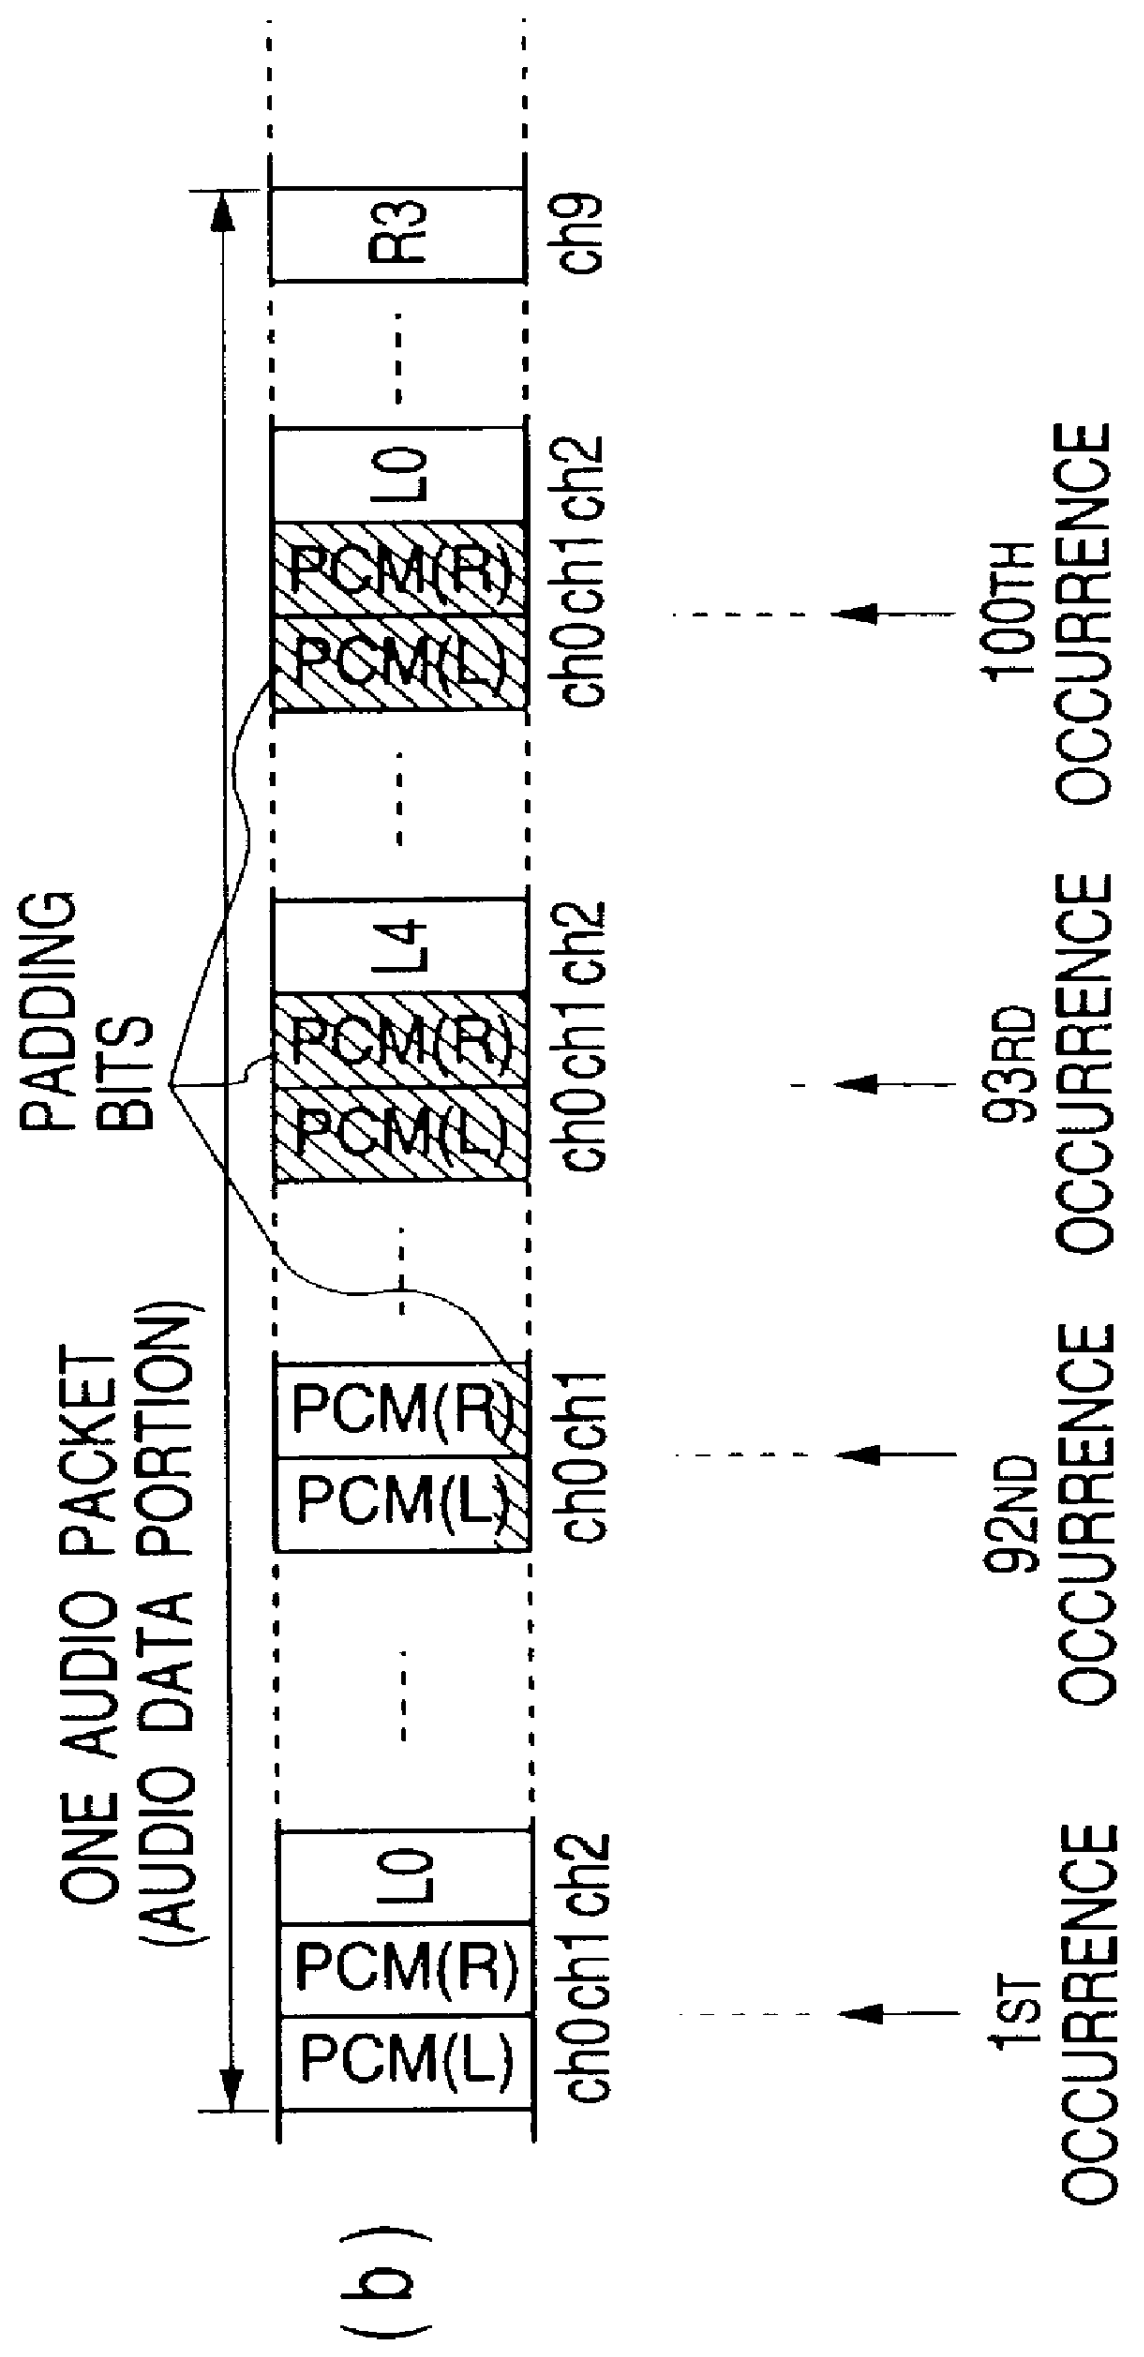 DVD-compatible optical recording disk conveying audio signals encoded both as PCM data and as single bit stream data generated by sigma-delta modulation, and encoder apparatus and decoder apparatus for same